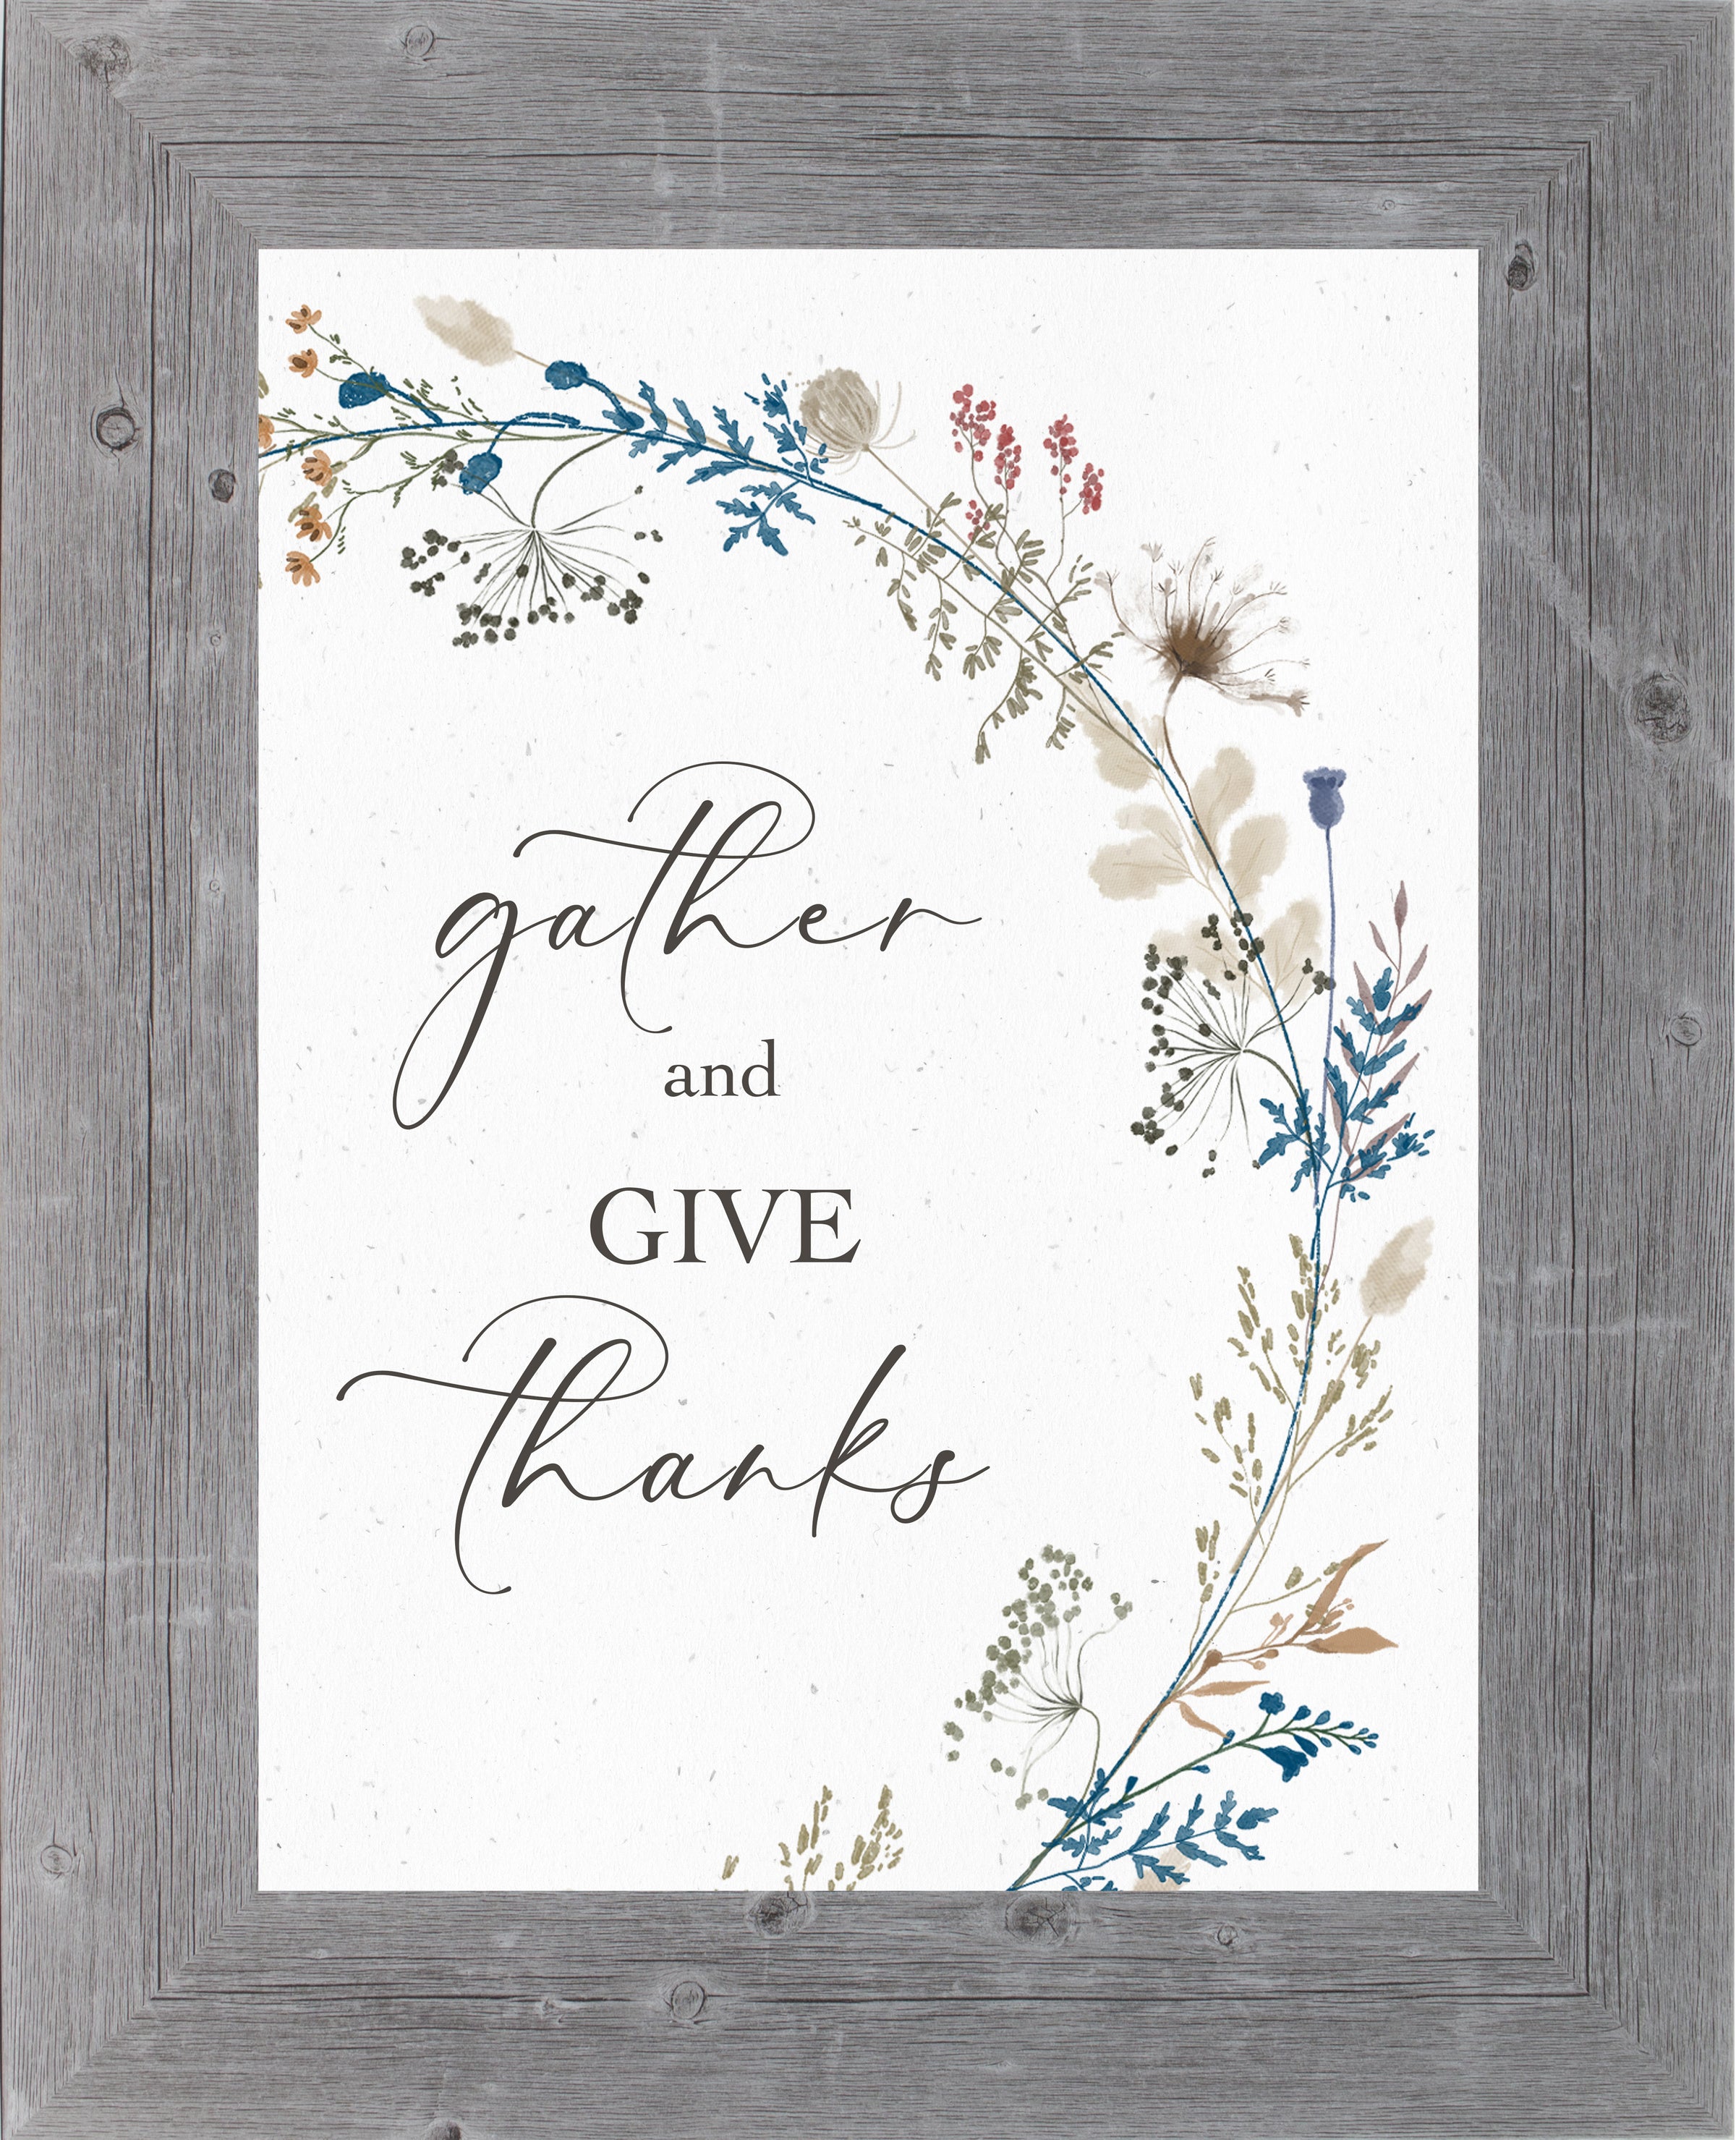 Gather and Give Thanks by Summer Snow SN326